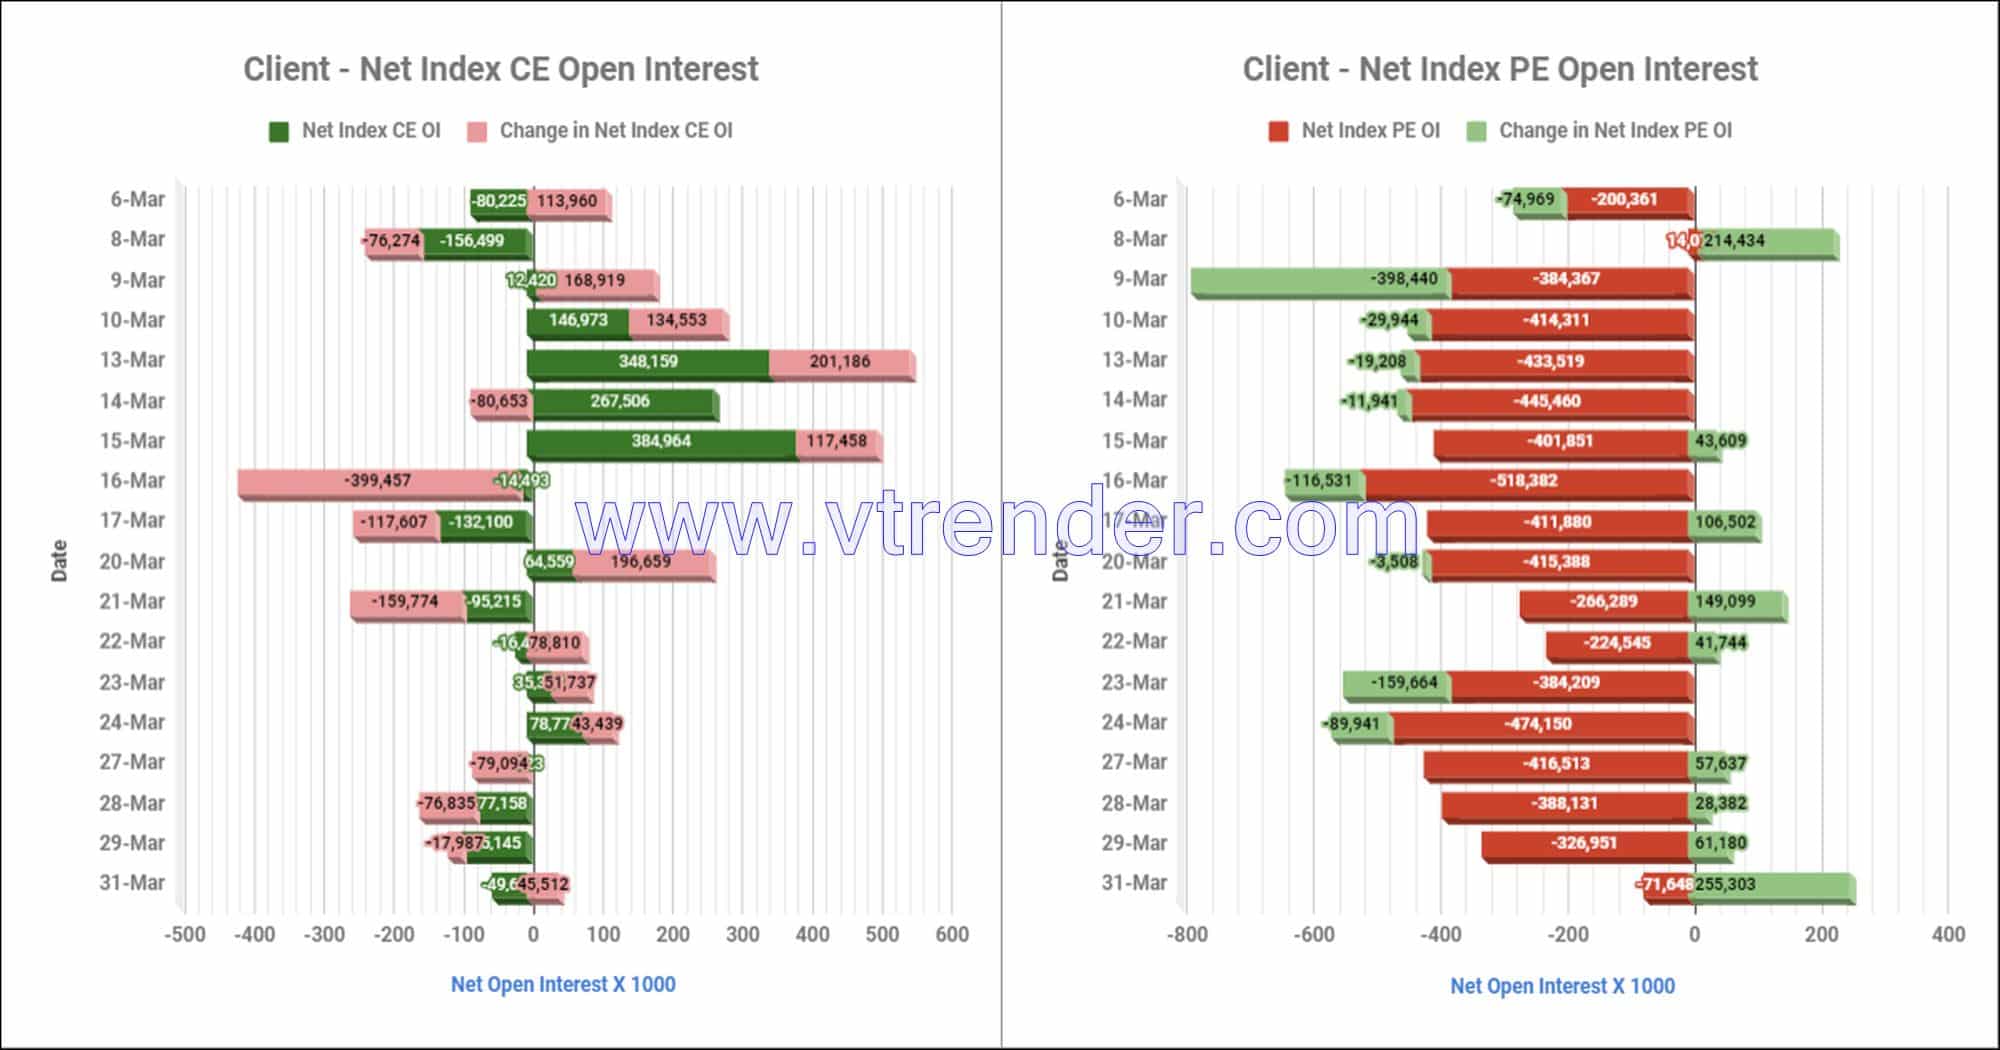 Clientinop31Mar Participantwise Net Open Interest And Net Equity Investments – 31St Mar 2023 Client, Equity, Fii, Index Futures, Index Options, Open Interest, Prop